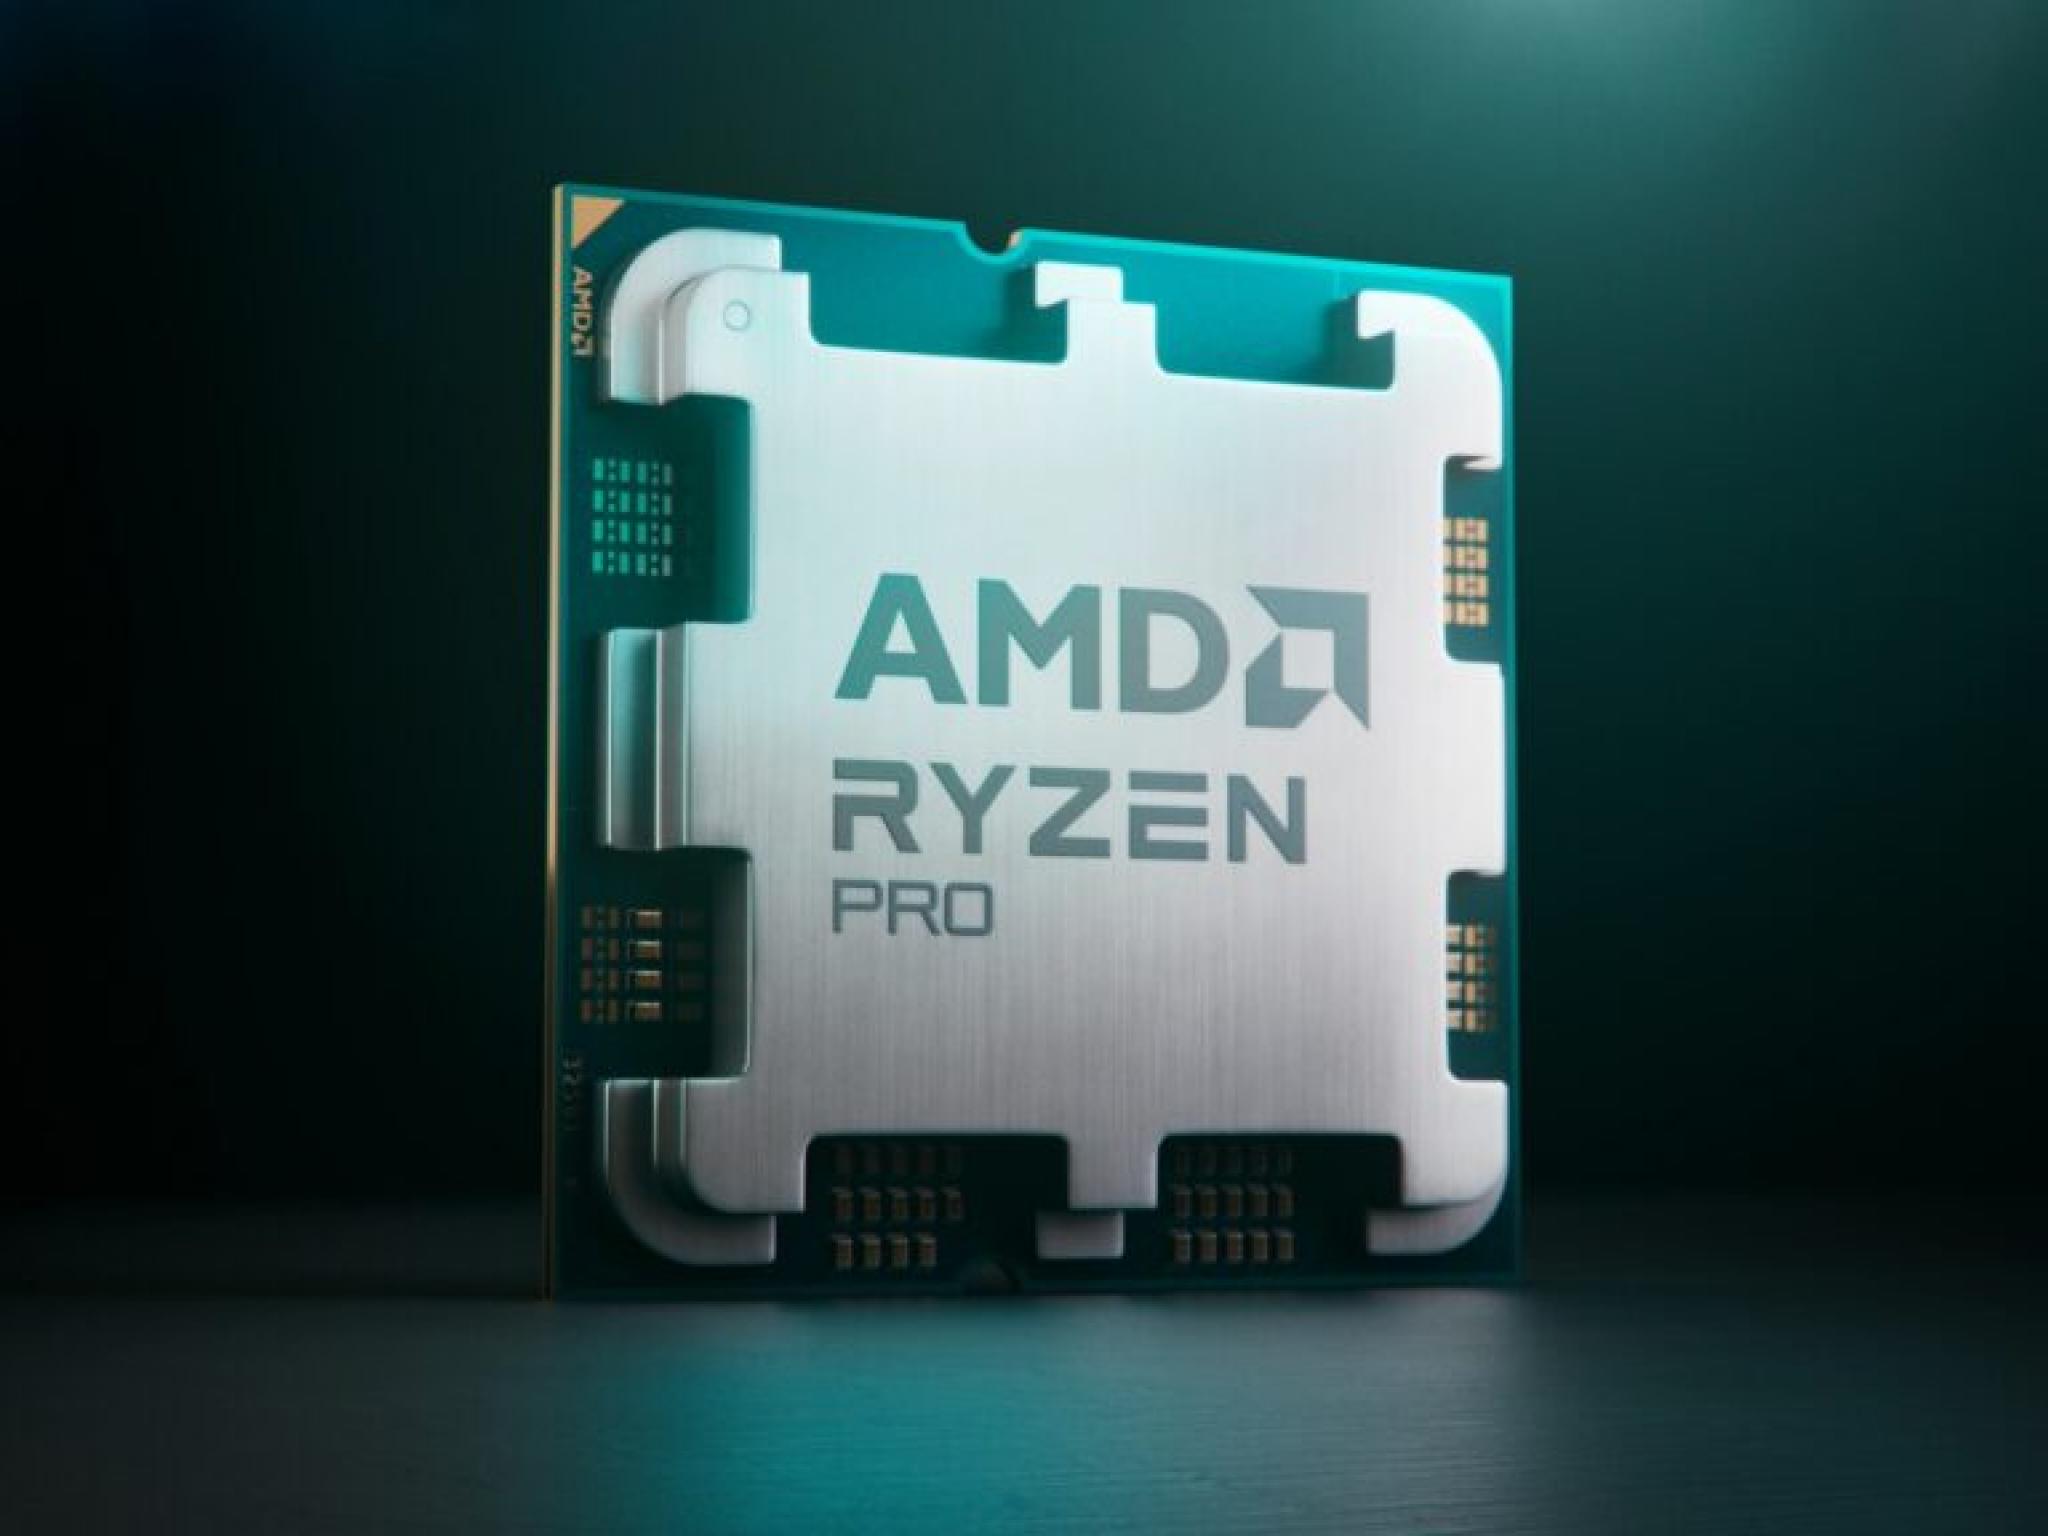  amd-investors-pull-back-after-modest-q1-beat-lukewarm-guidance-ceo-touts-ai-chip-ramp-up-updated 